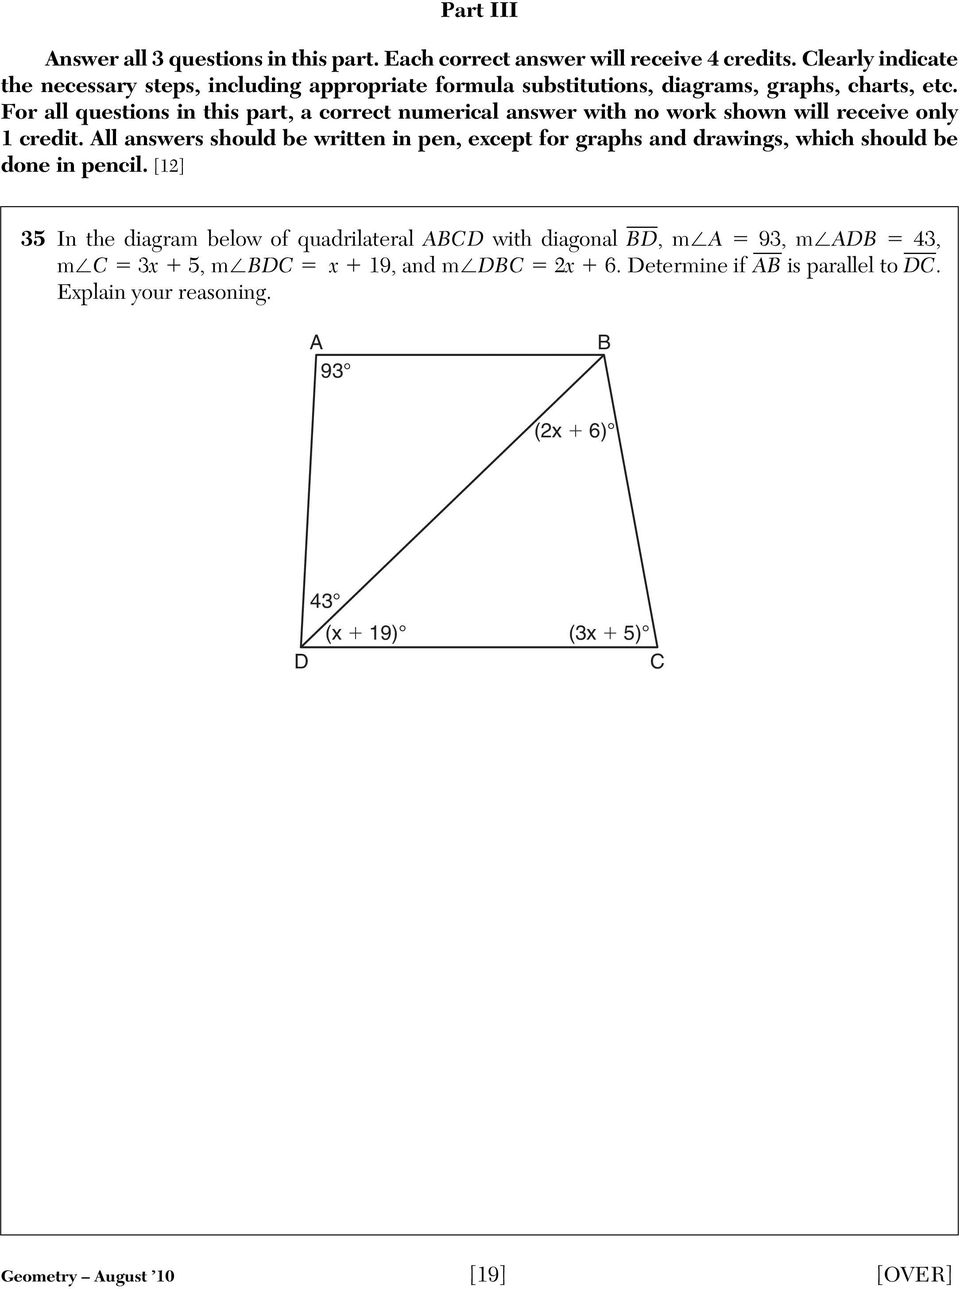 For all questions in this part, a correct numerical answer with no work shown will receive only 1 credit.